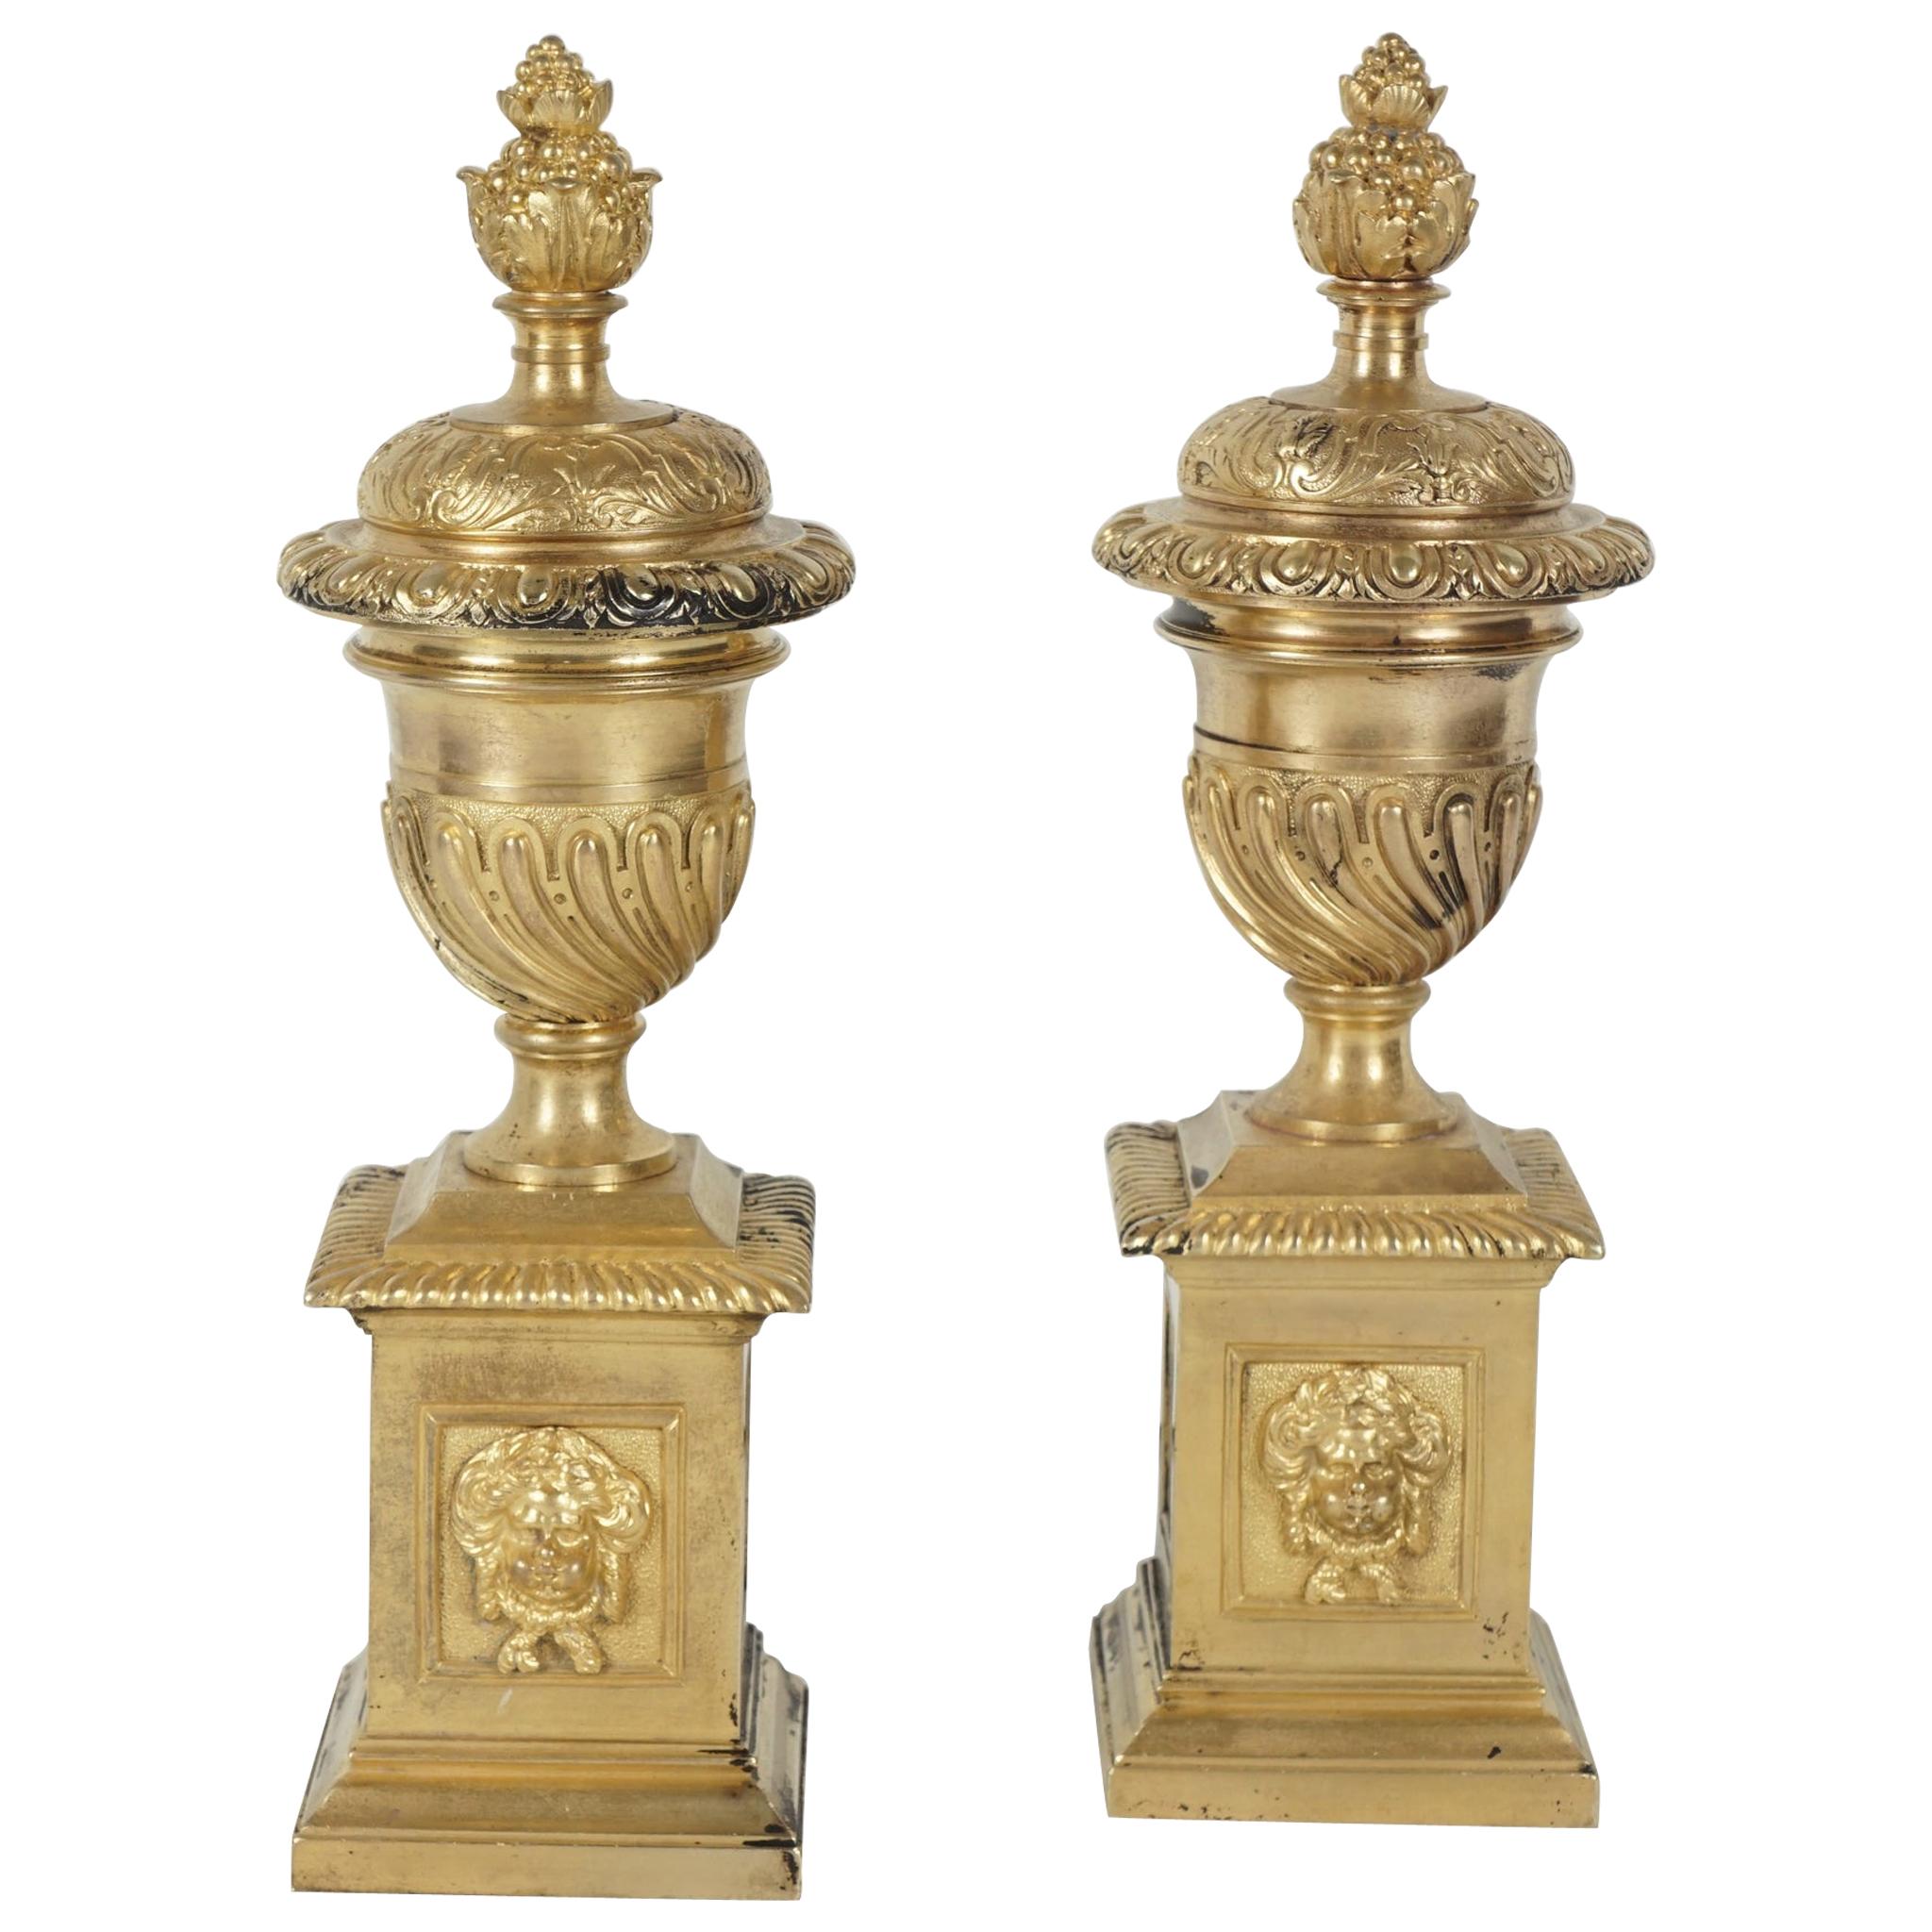 Pair of Period English Baroque Gilded Bronze Fire Dogs